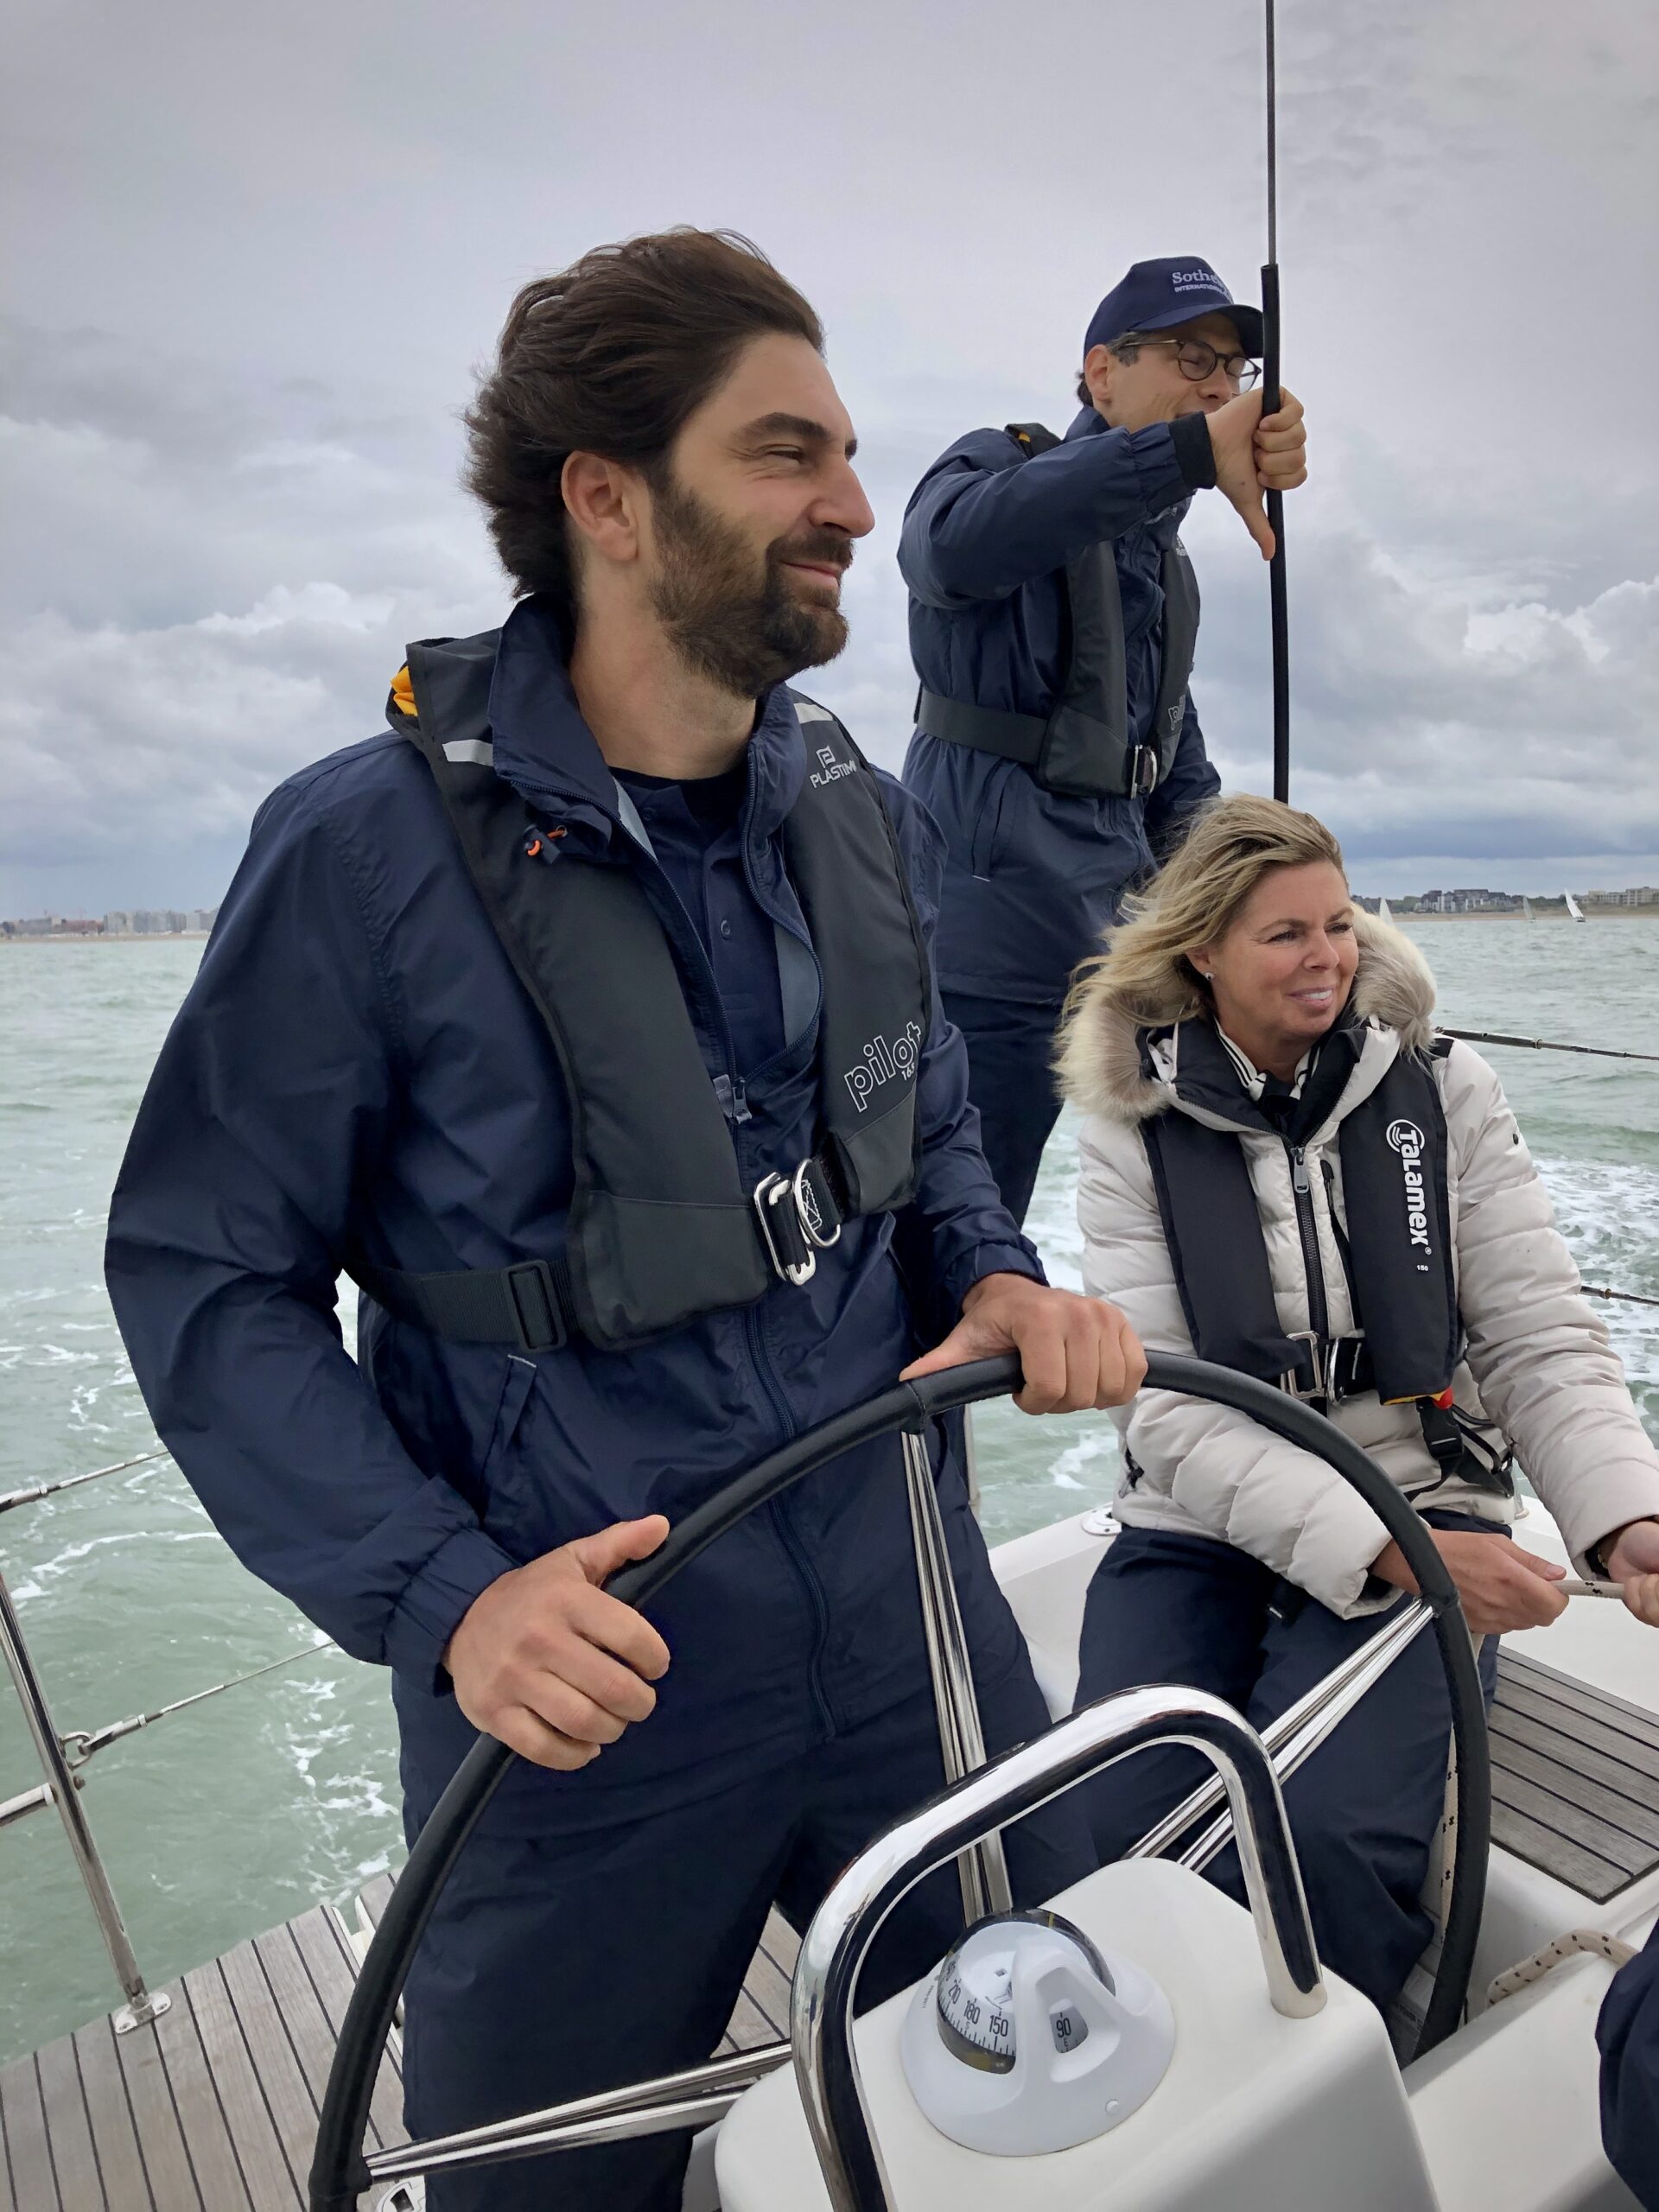 Our managing director, David Chicard, steering the boat during the sailing race for real estate leaders. 